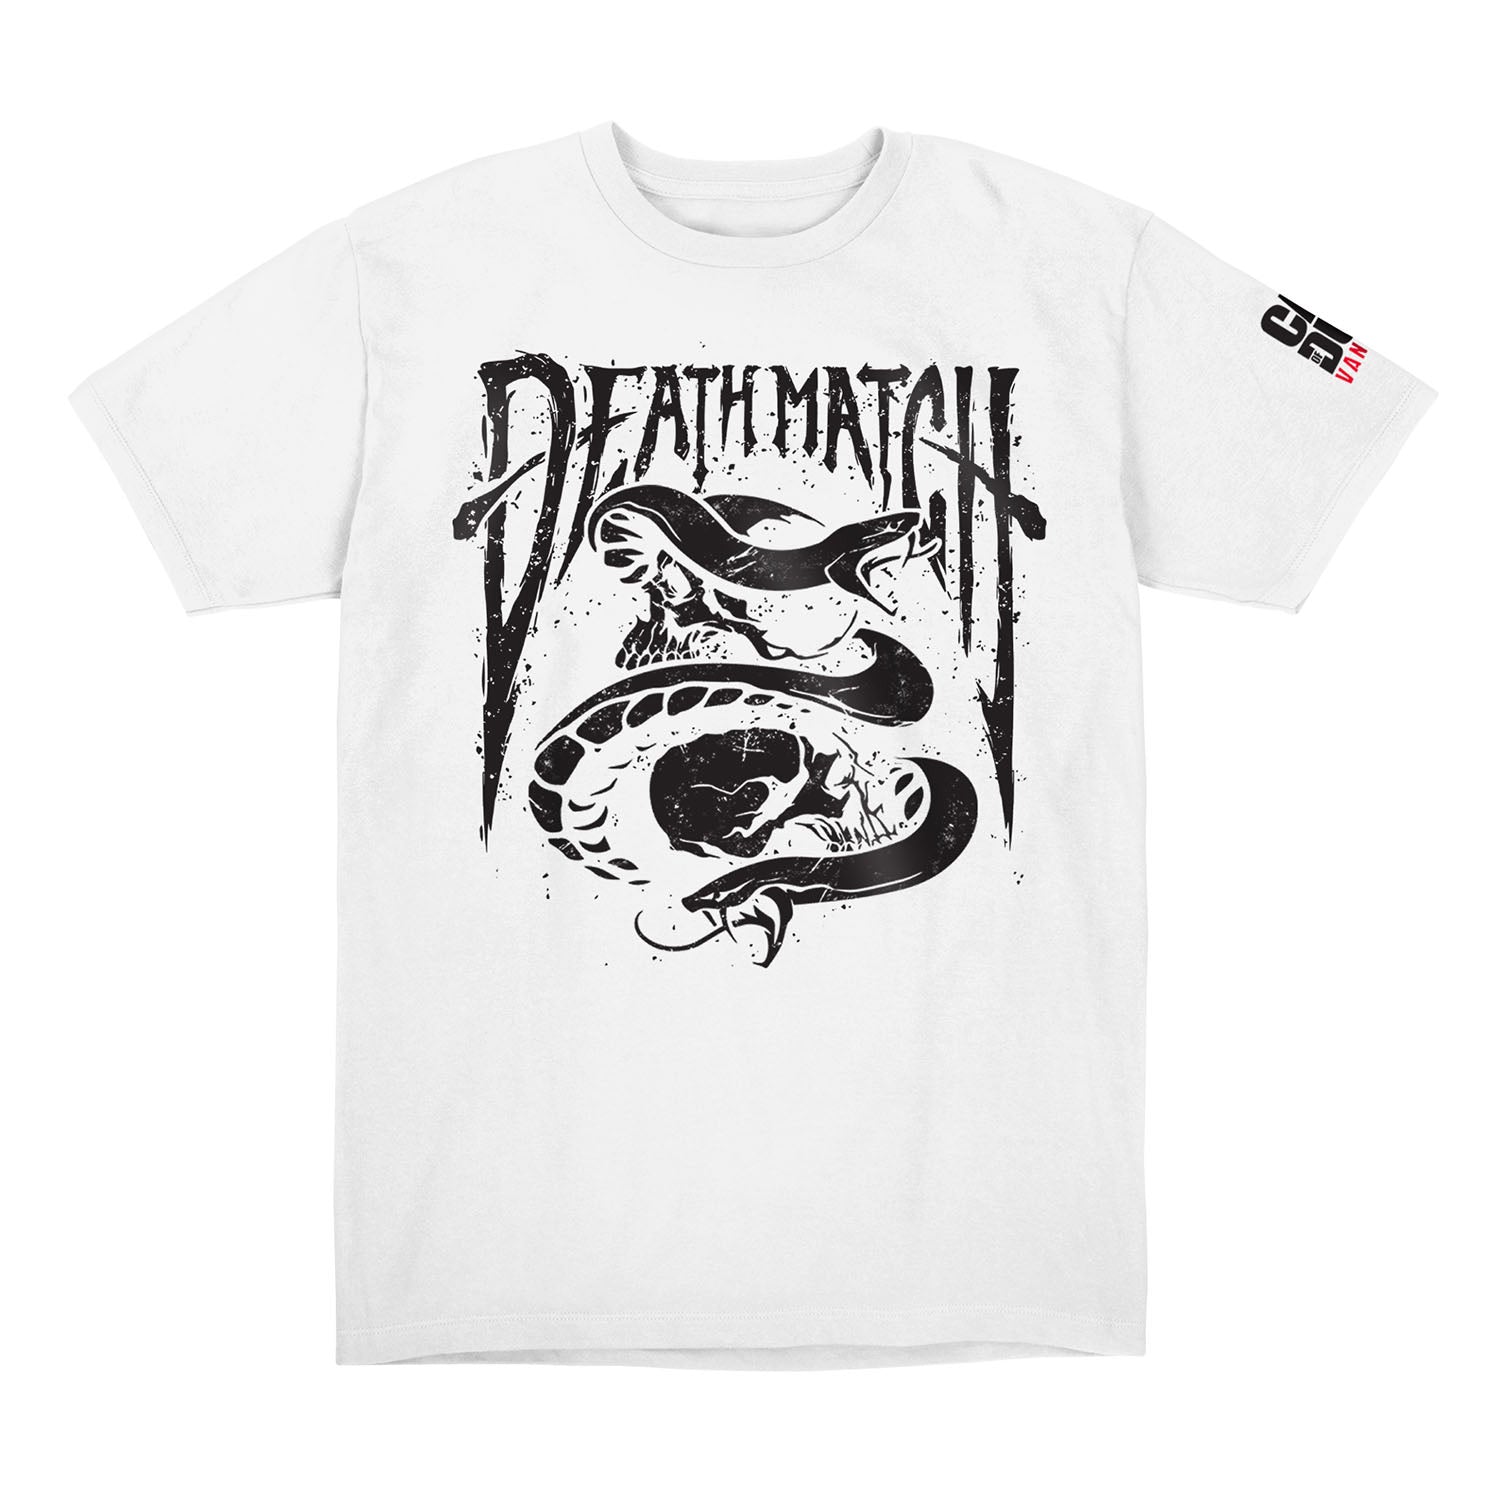 Tempel dynasti voldtage Call of Duty Vanguard White Deathmatch T-Shirt - Call of Duty Store